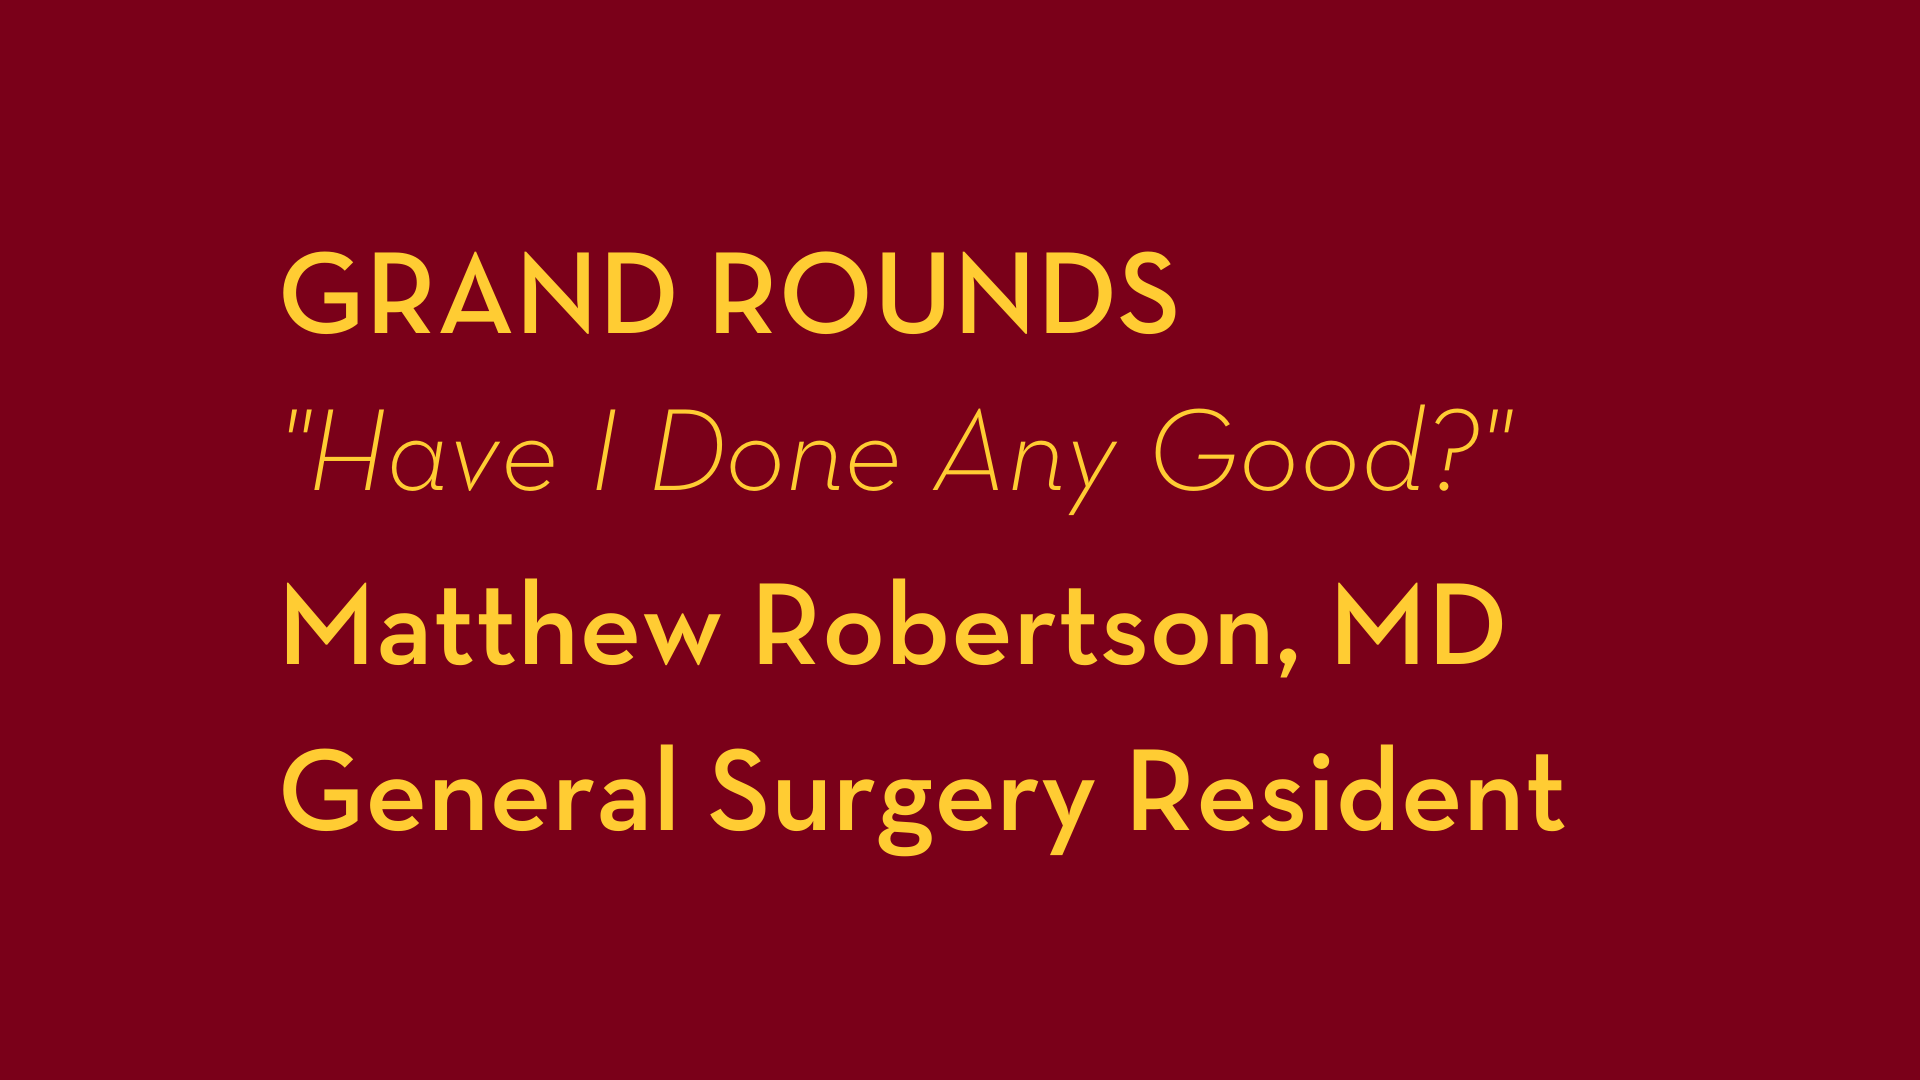 grand rounds